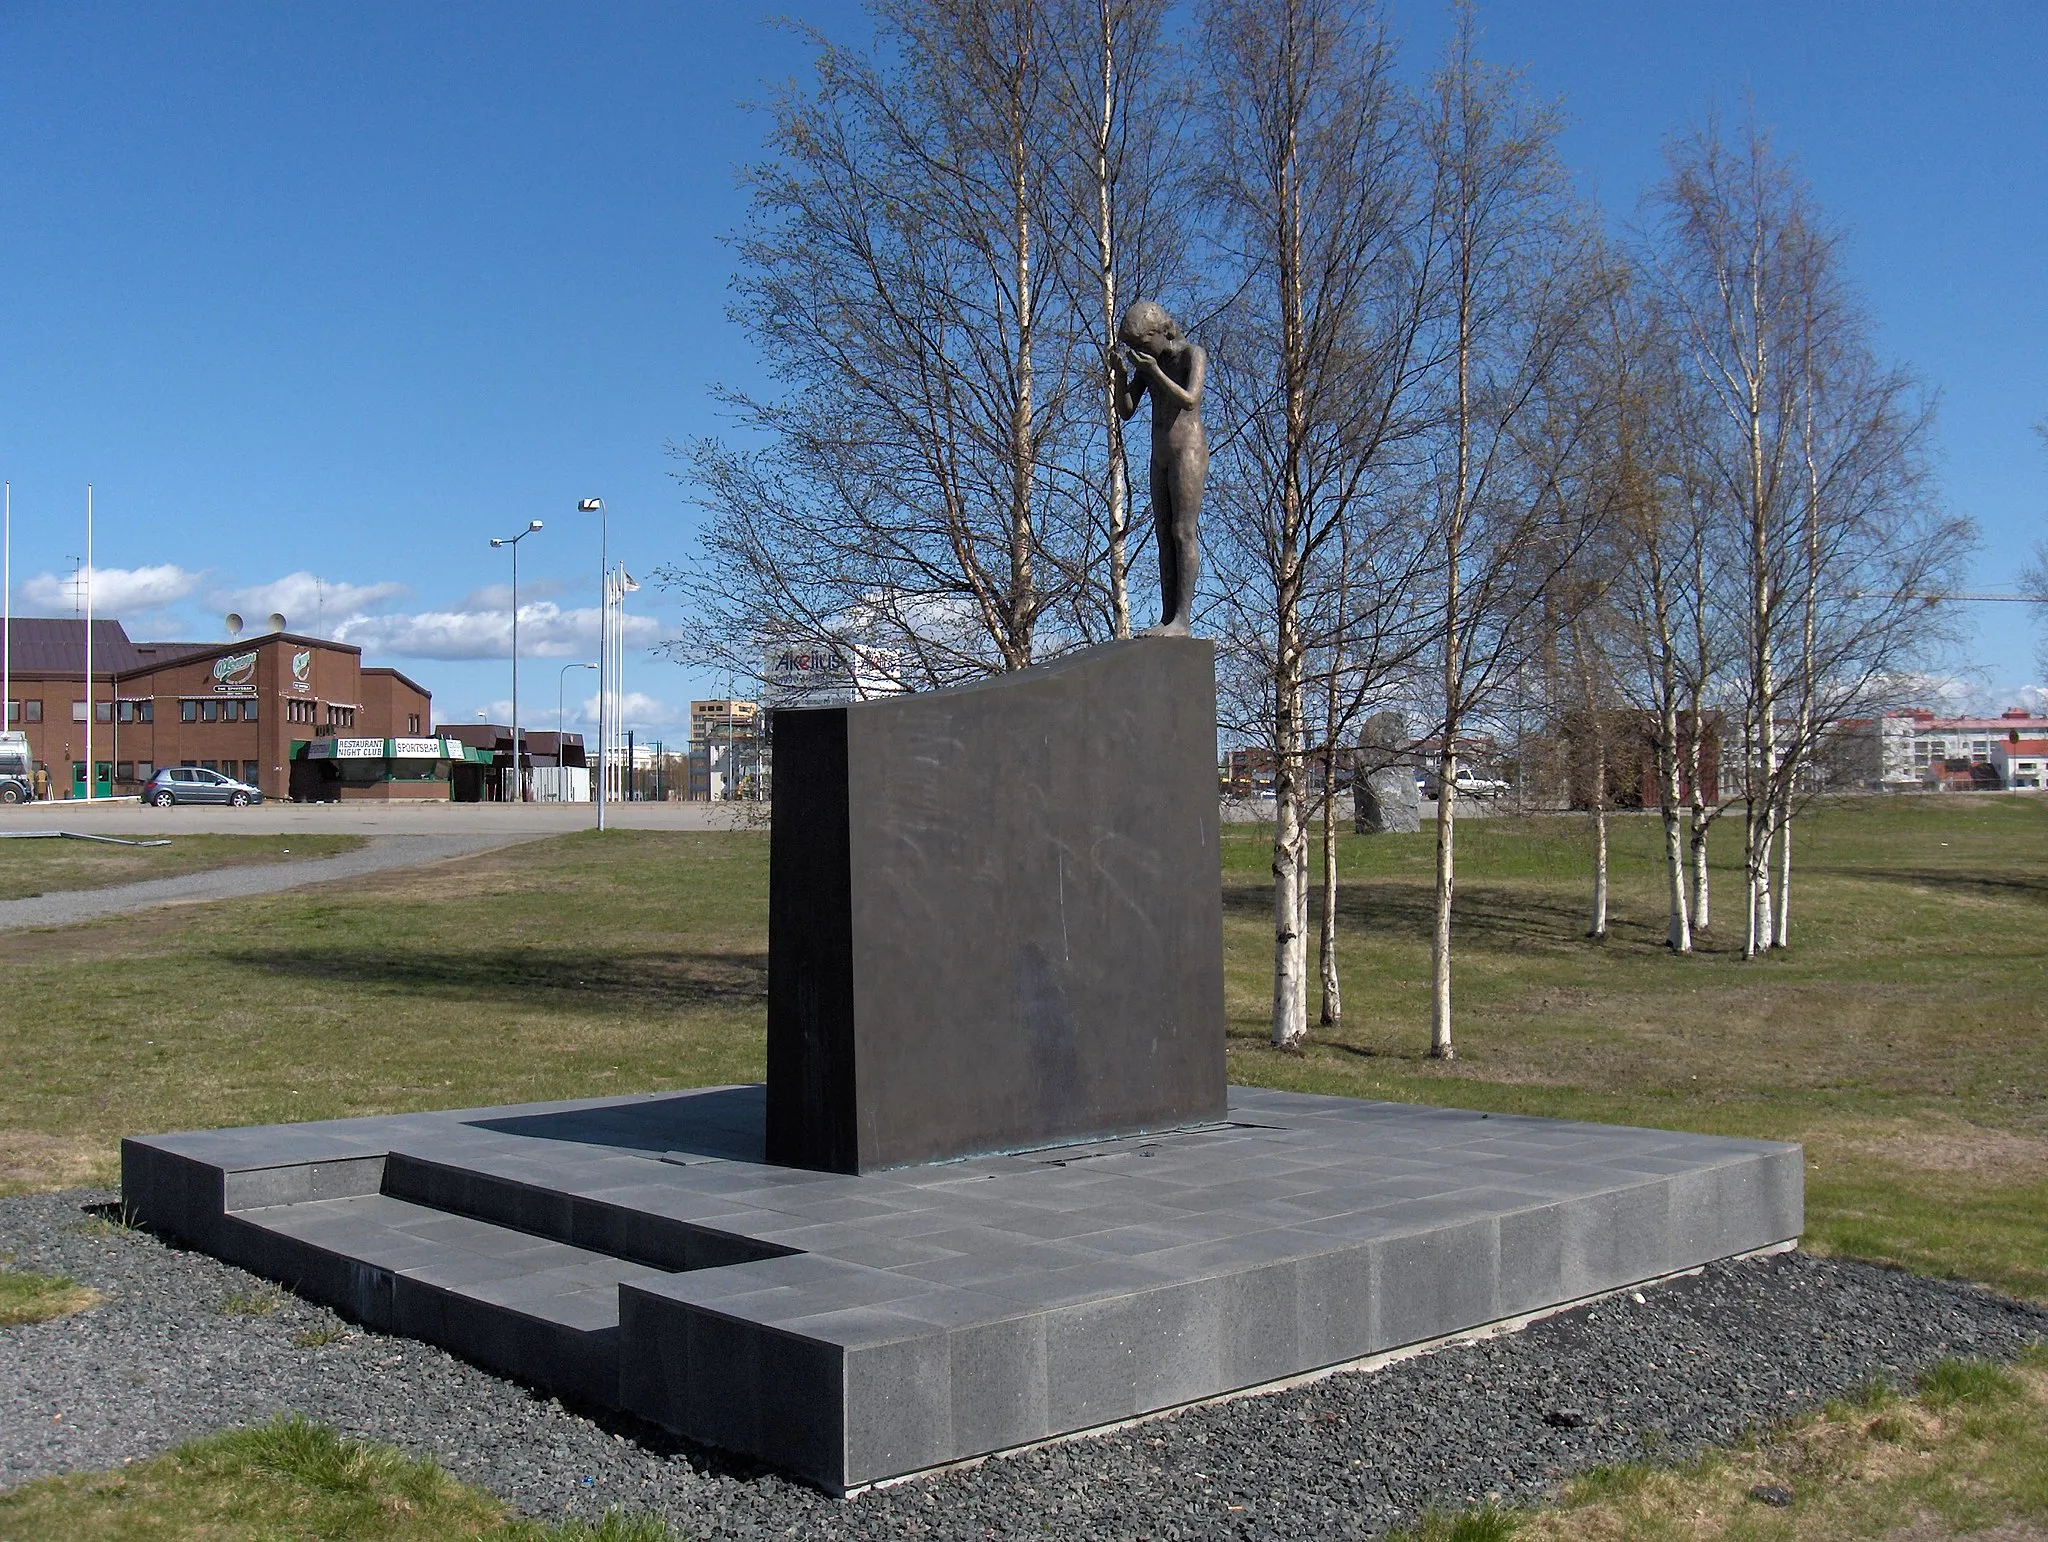 Photo showing: Memorial commemorating the Finnish children evacuated to Sweden during World War II, Haparanda, Sweden. The sculpture was designed by Anna Jäämeri-Ruusuvuori and unveiled on 26 April 2005. The buildings on the right of the photograph (behind the trees) are across the border in Tornio, Finland.